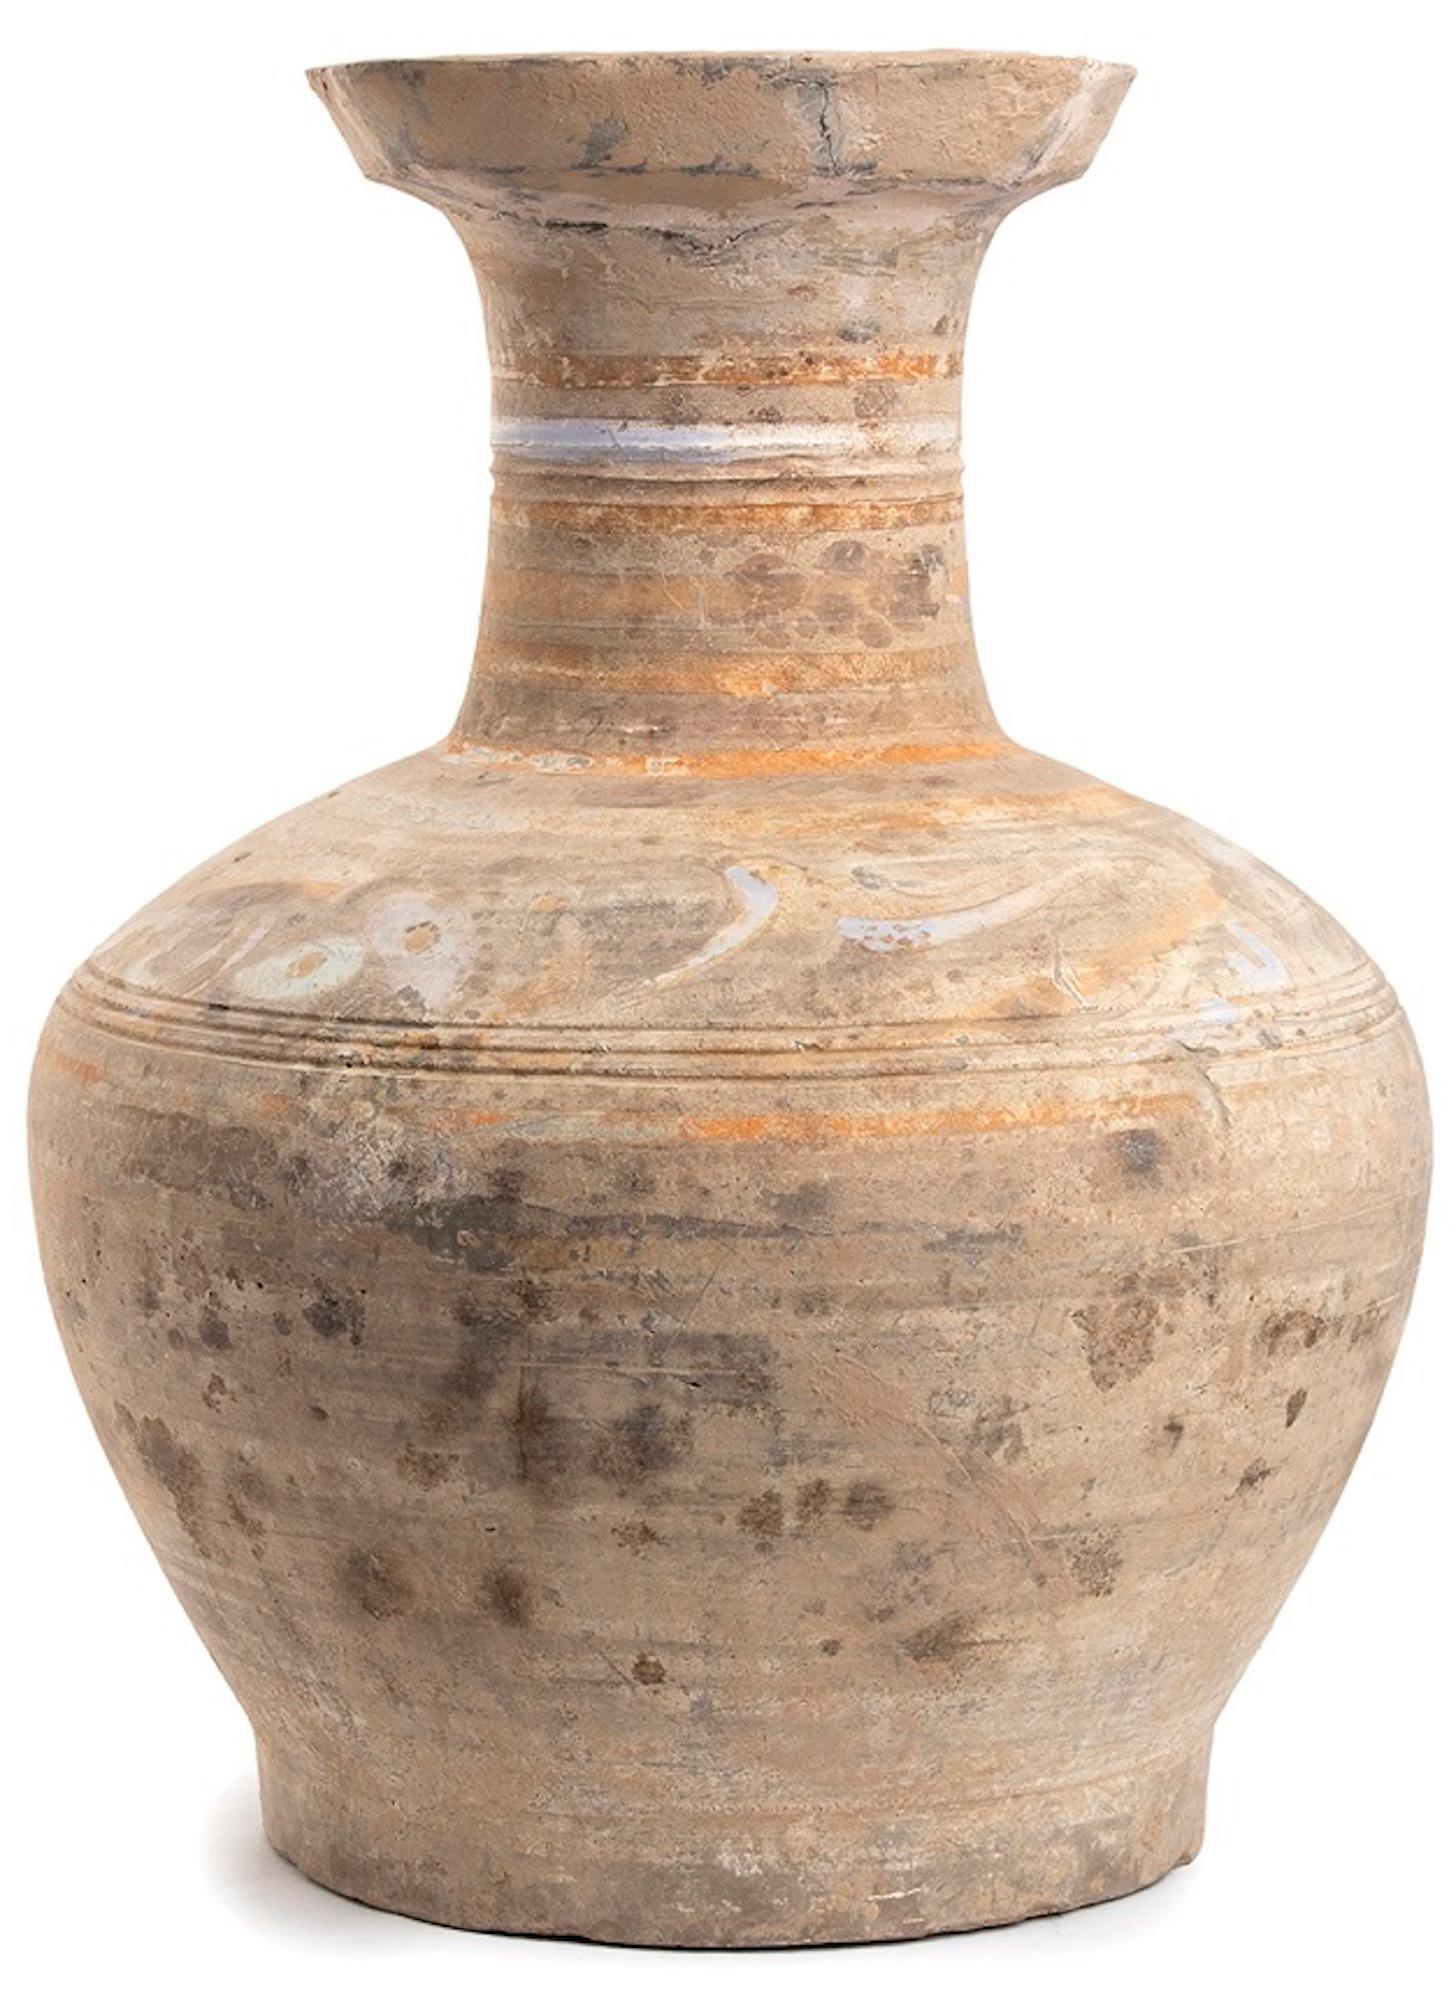 Ceramic vase – Han dynasty China is an original decorative object realized in China during the Han dynasty.

Painted ceramics.

Provenance: Italian Family Private Collection.

Good conditions. 

This object has been realized in China during